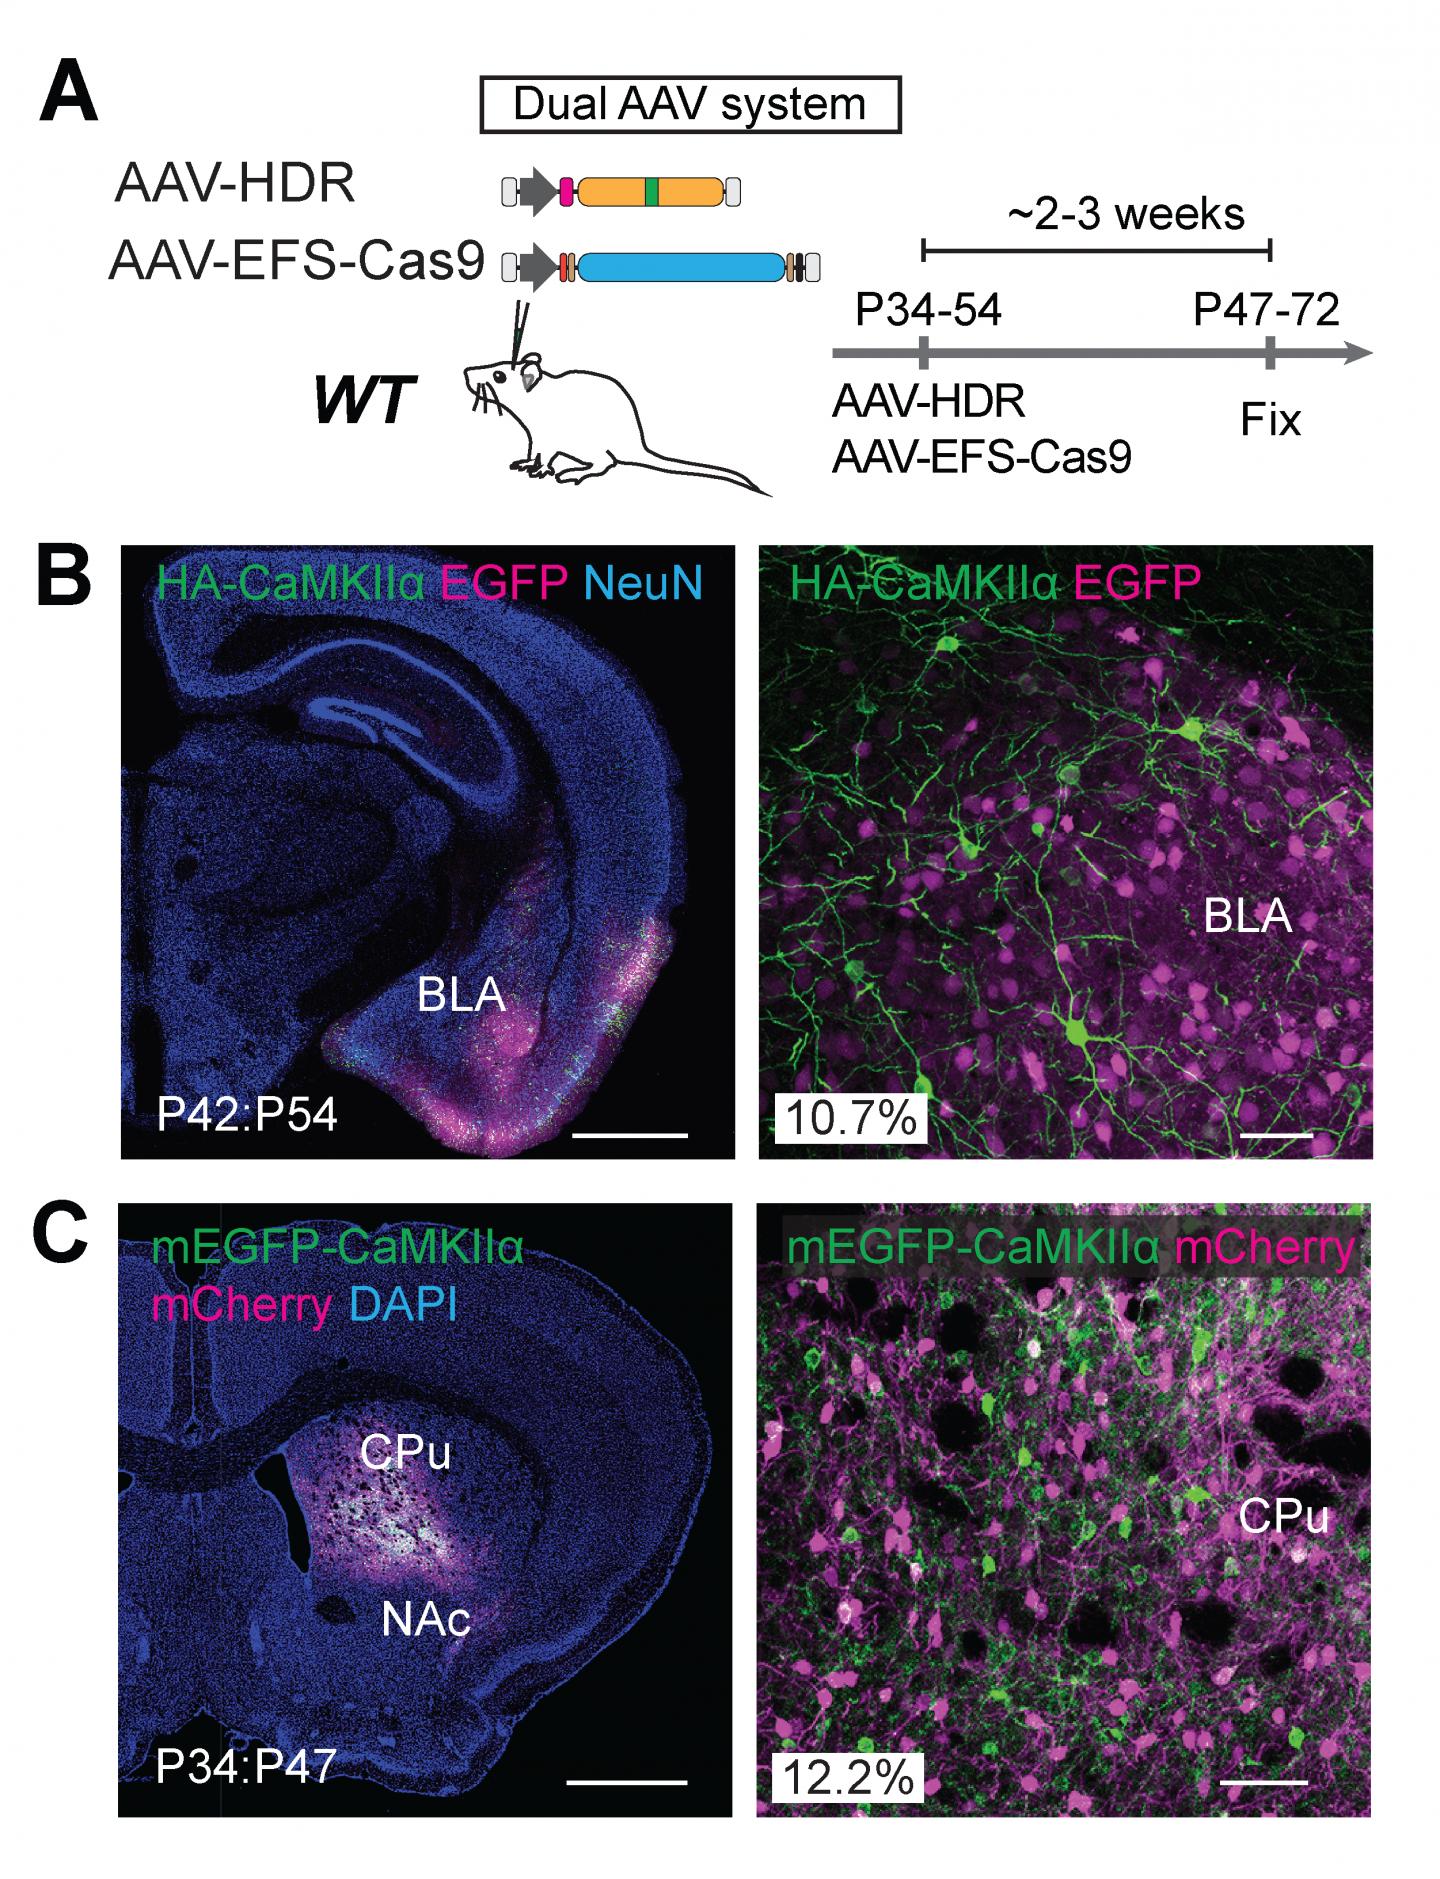 Dual AAV Systems for HDR-Mediated Genome Editing in Vivo